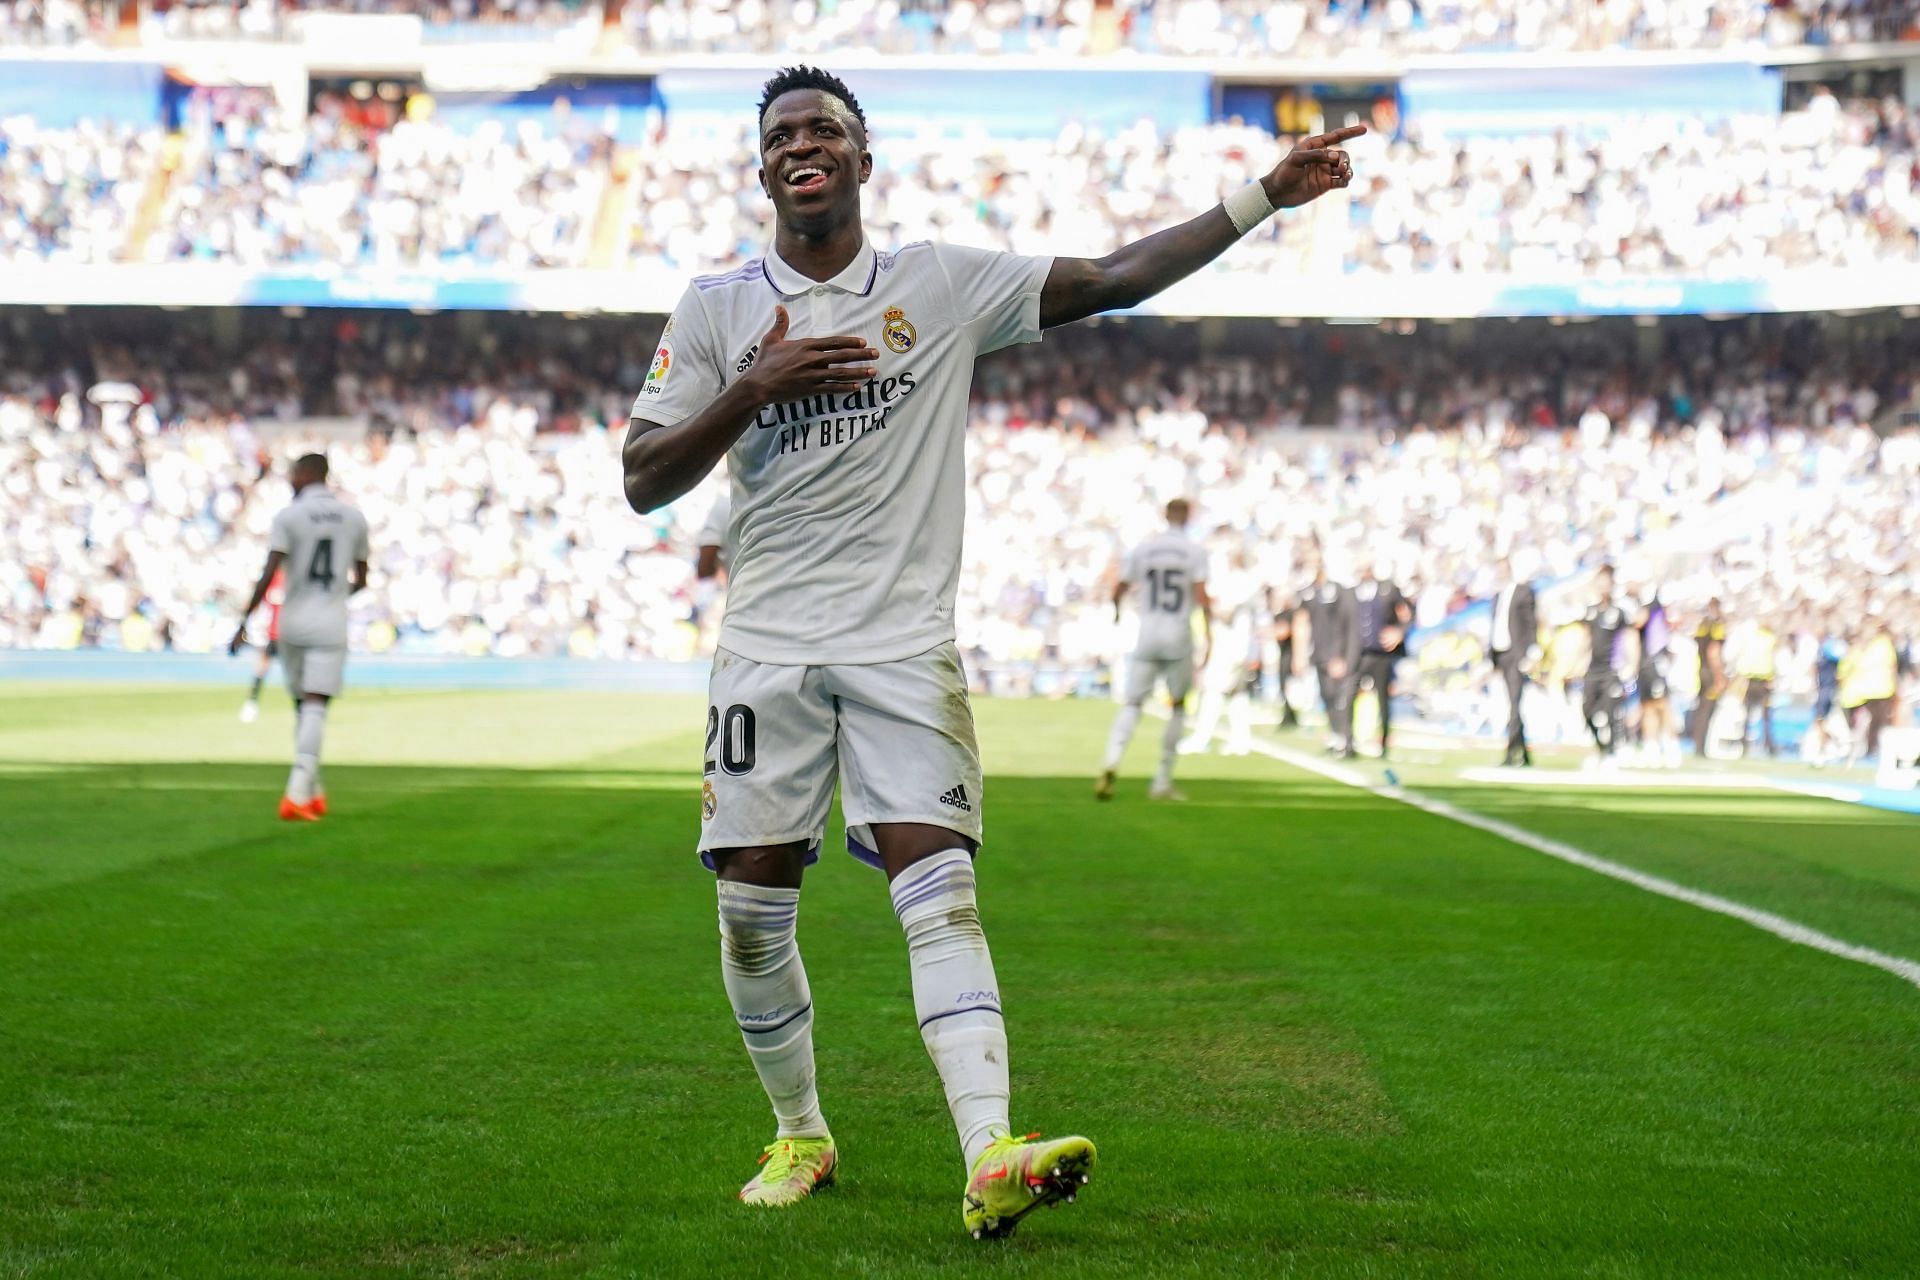 Vinicius Junior has developed in leaps and bounds at Real Madrid.